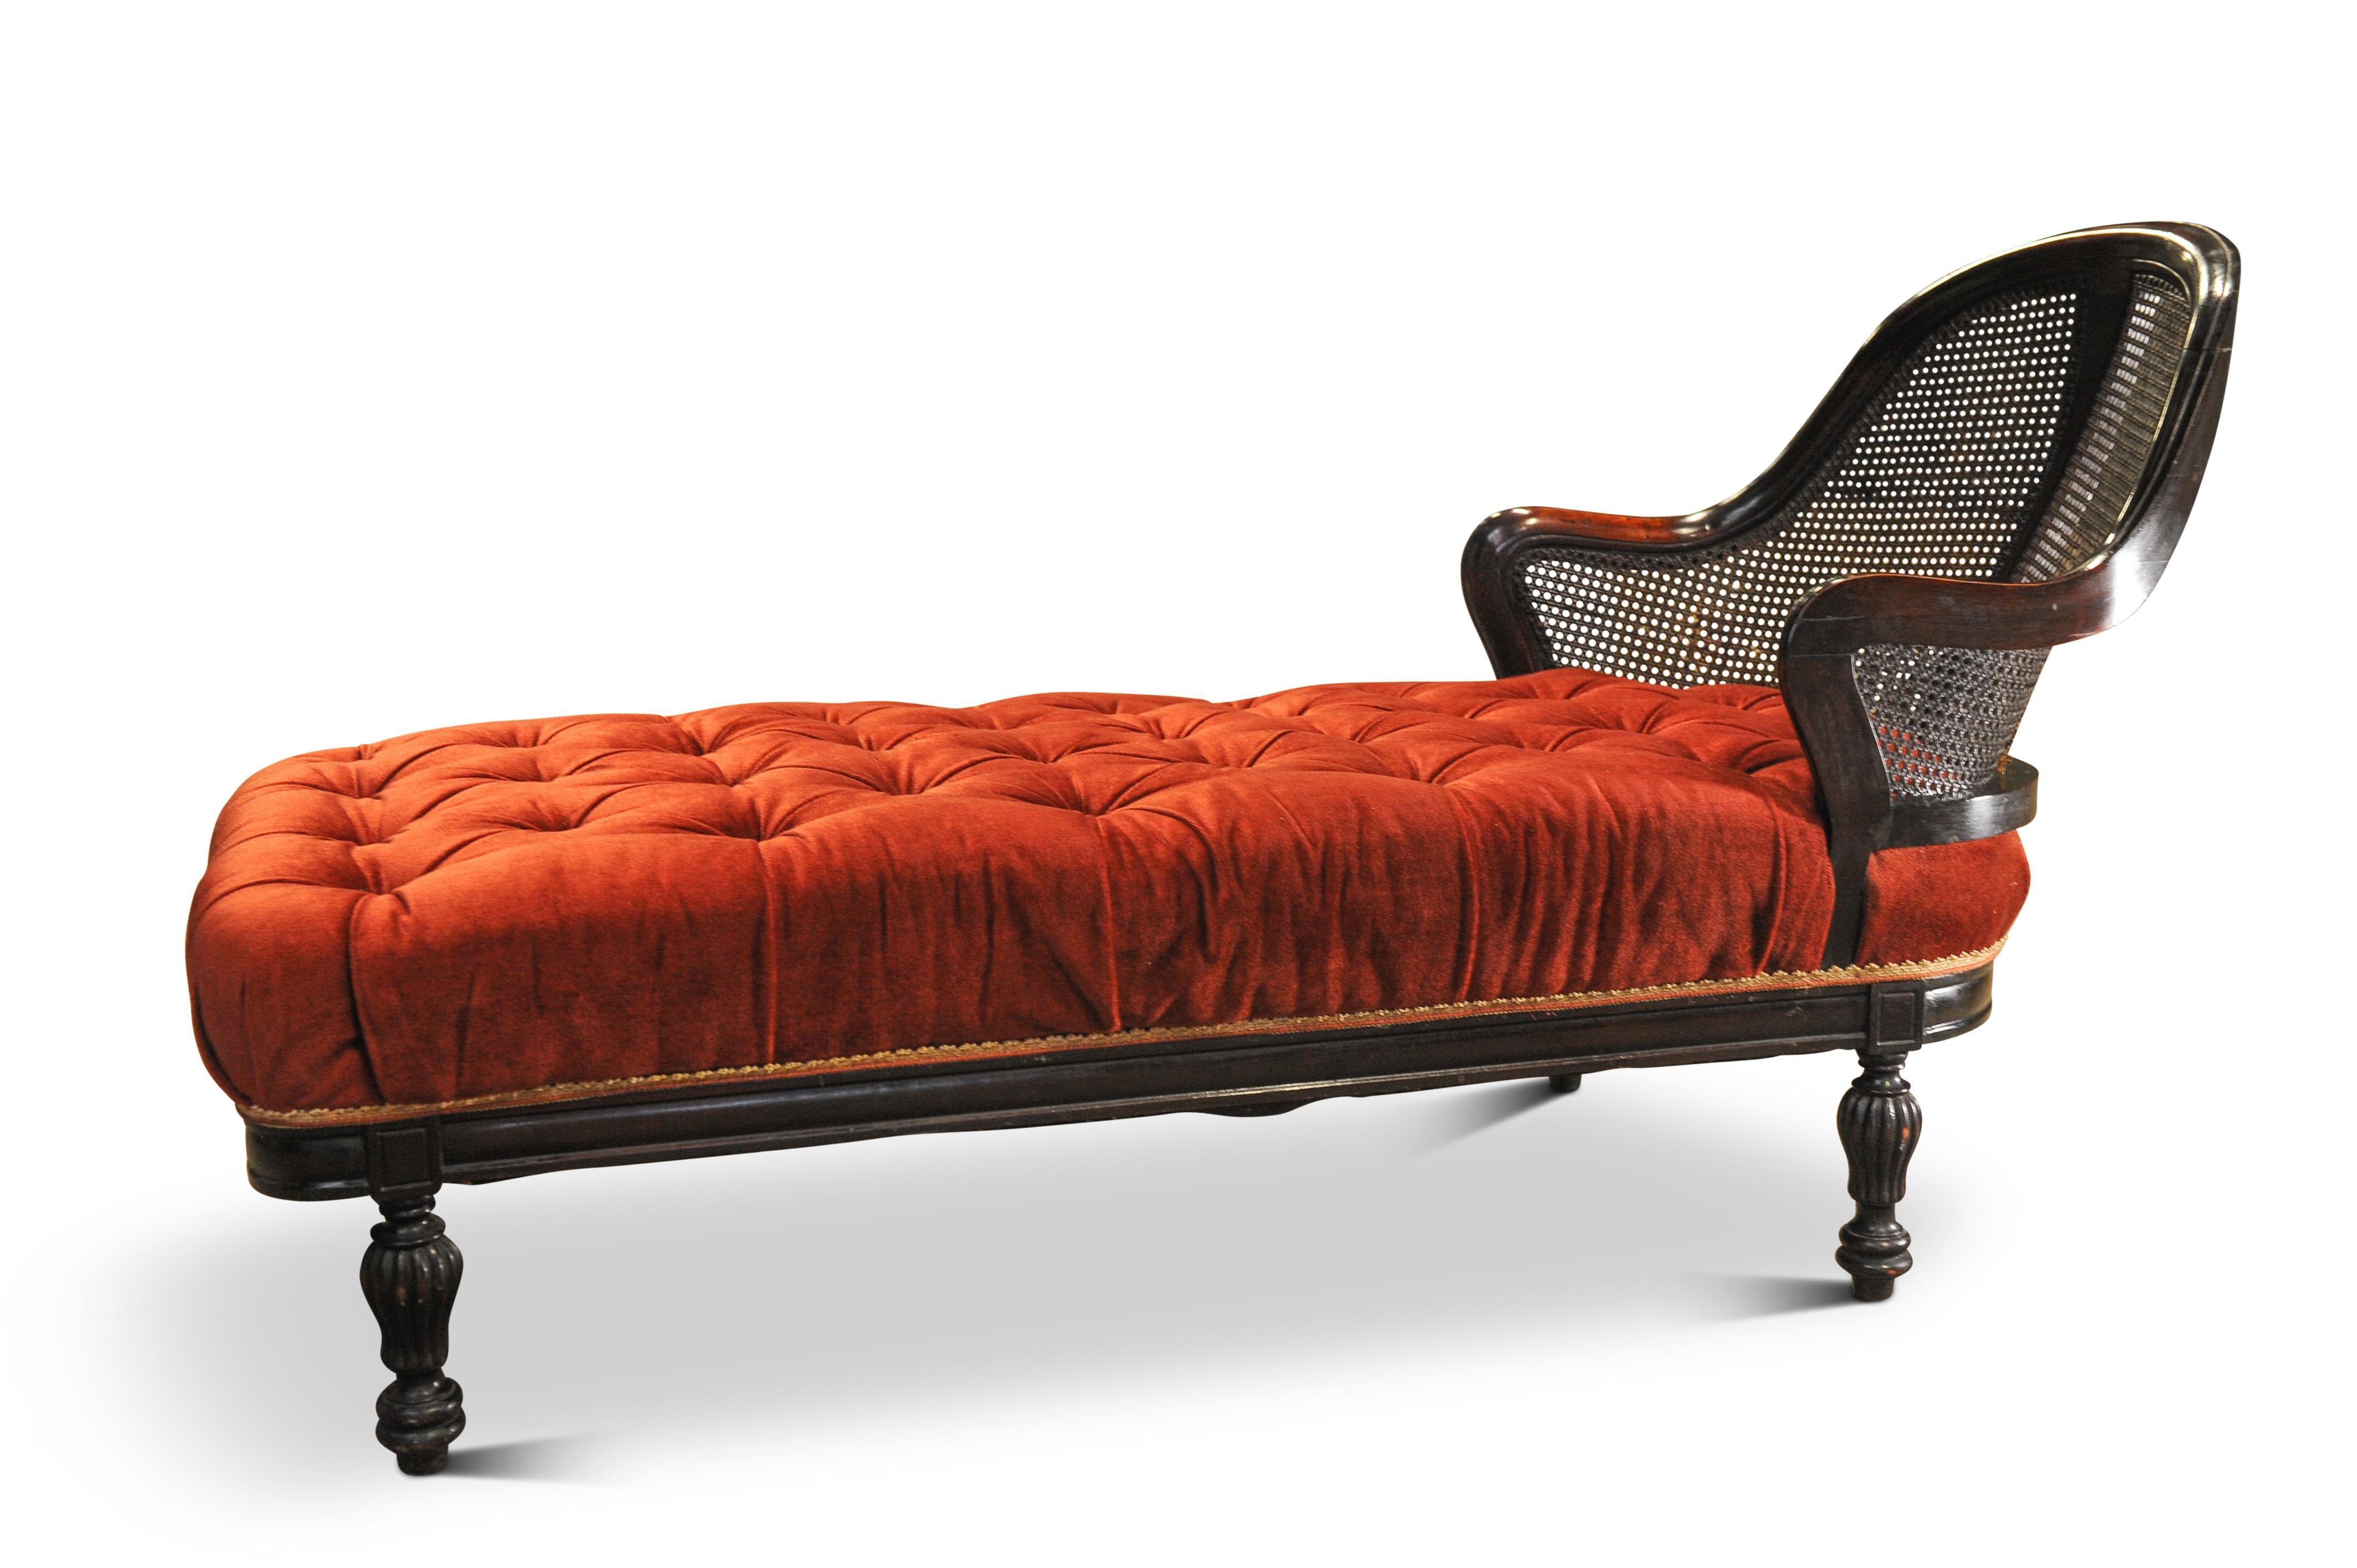 Rare Victorian Red Velvet Chesterfield Bergere Chaise Longue / Day Bed  In Good Condition For Sale In High Wycombe, GB